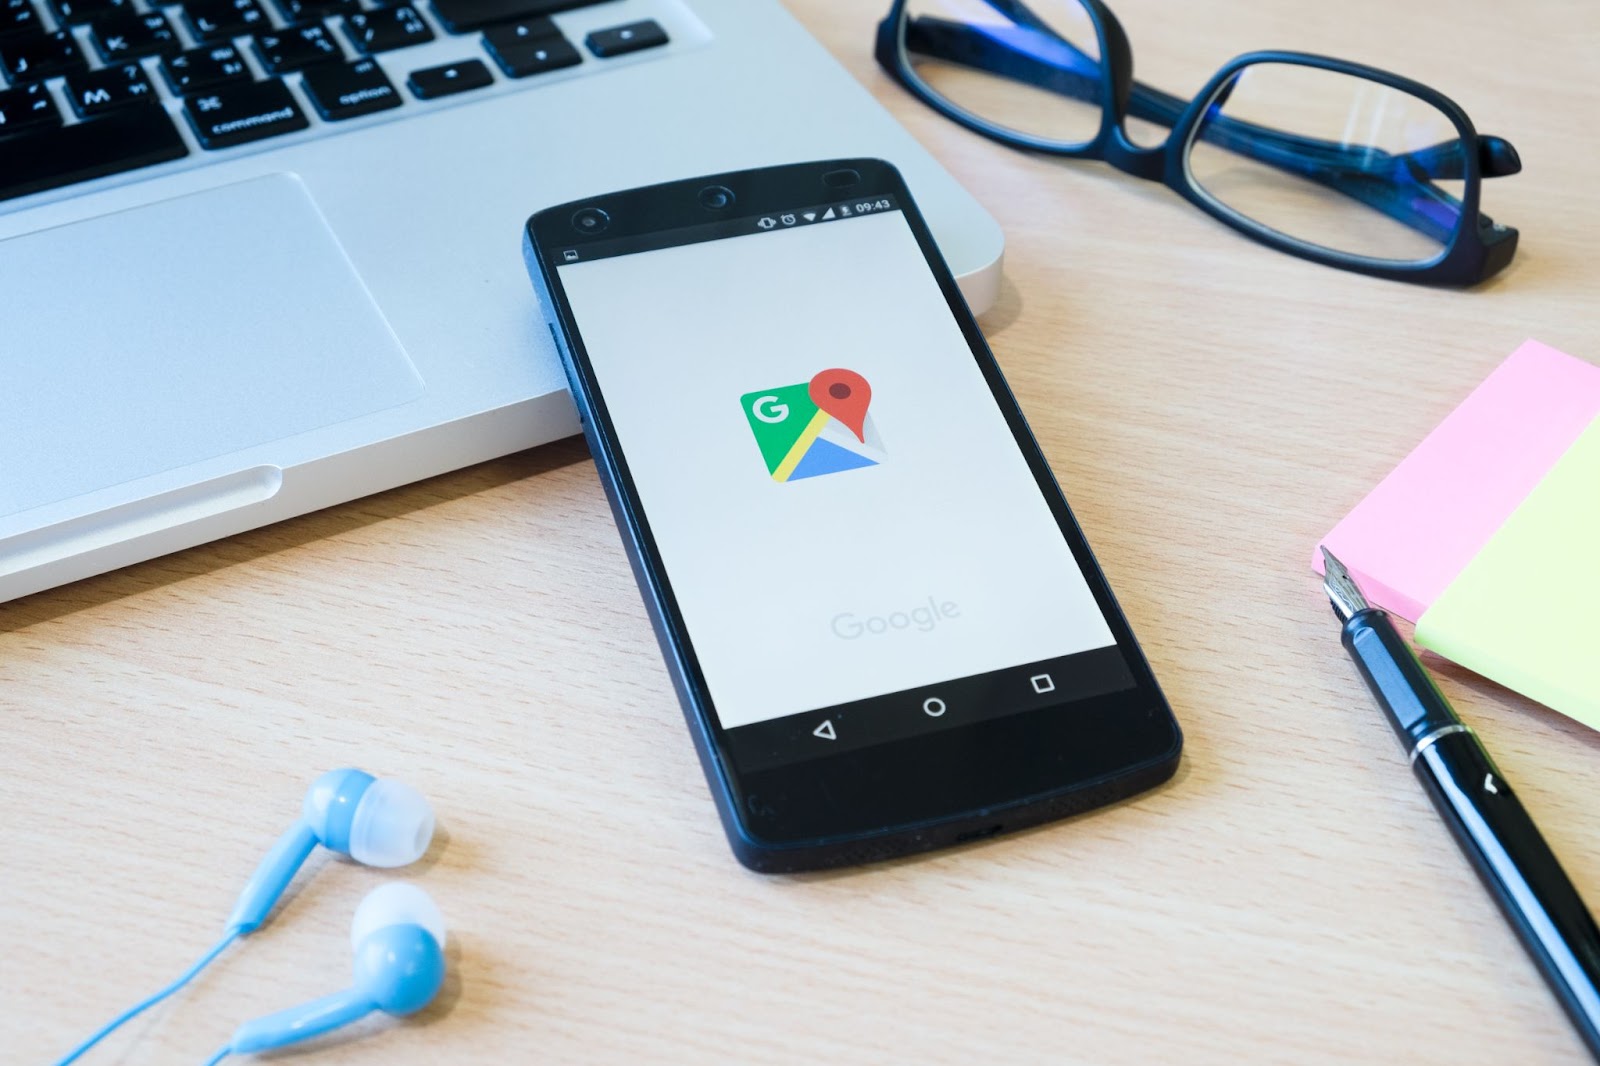 The Complete Guide to How to Track Someone on Google Maps & What You Can Discover